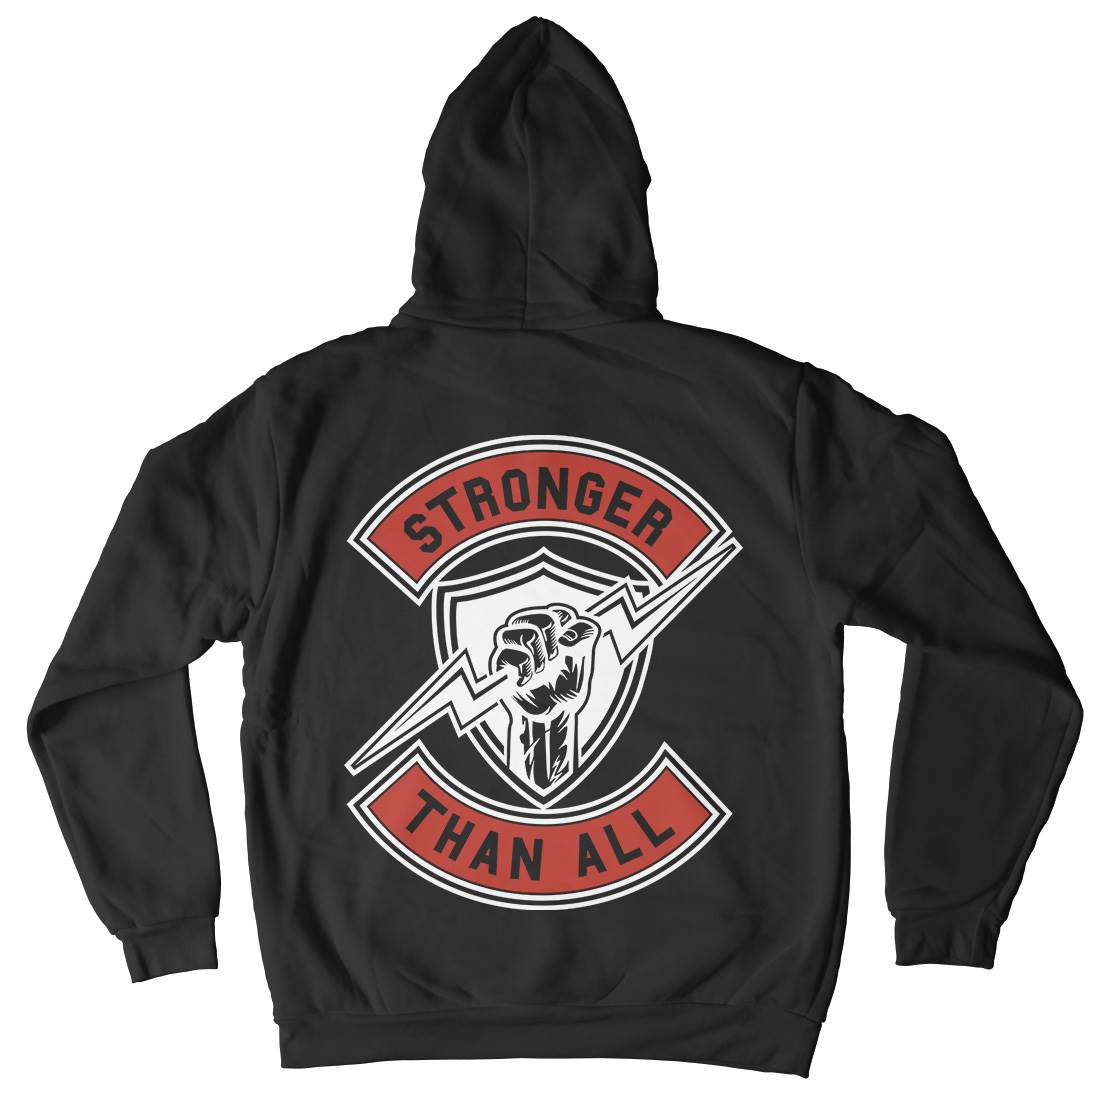 Stronger Than All Kids Crew Neck Hoodie Gym A290